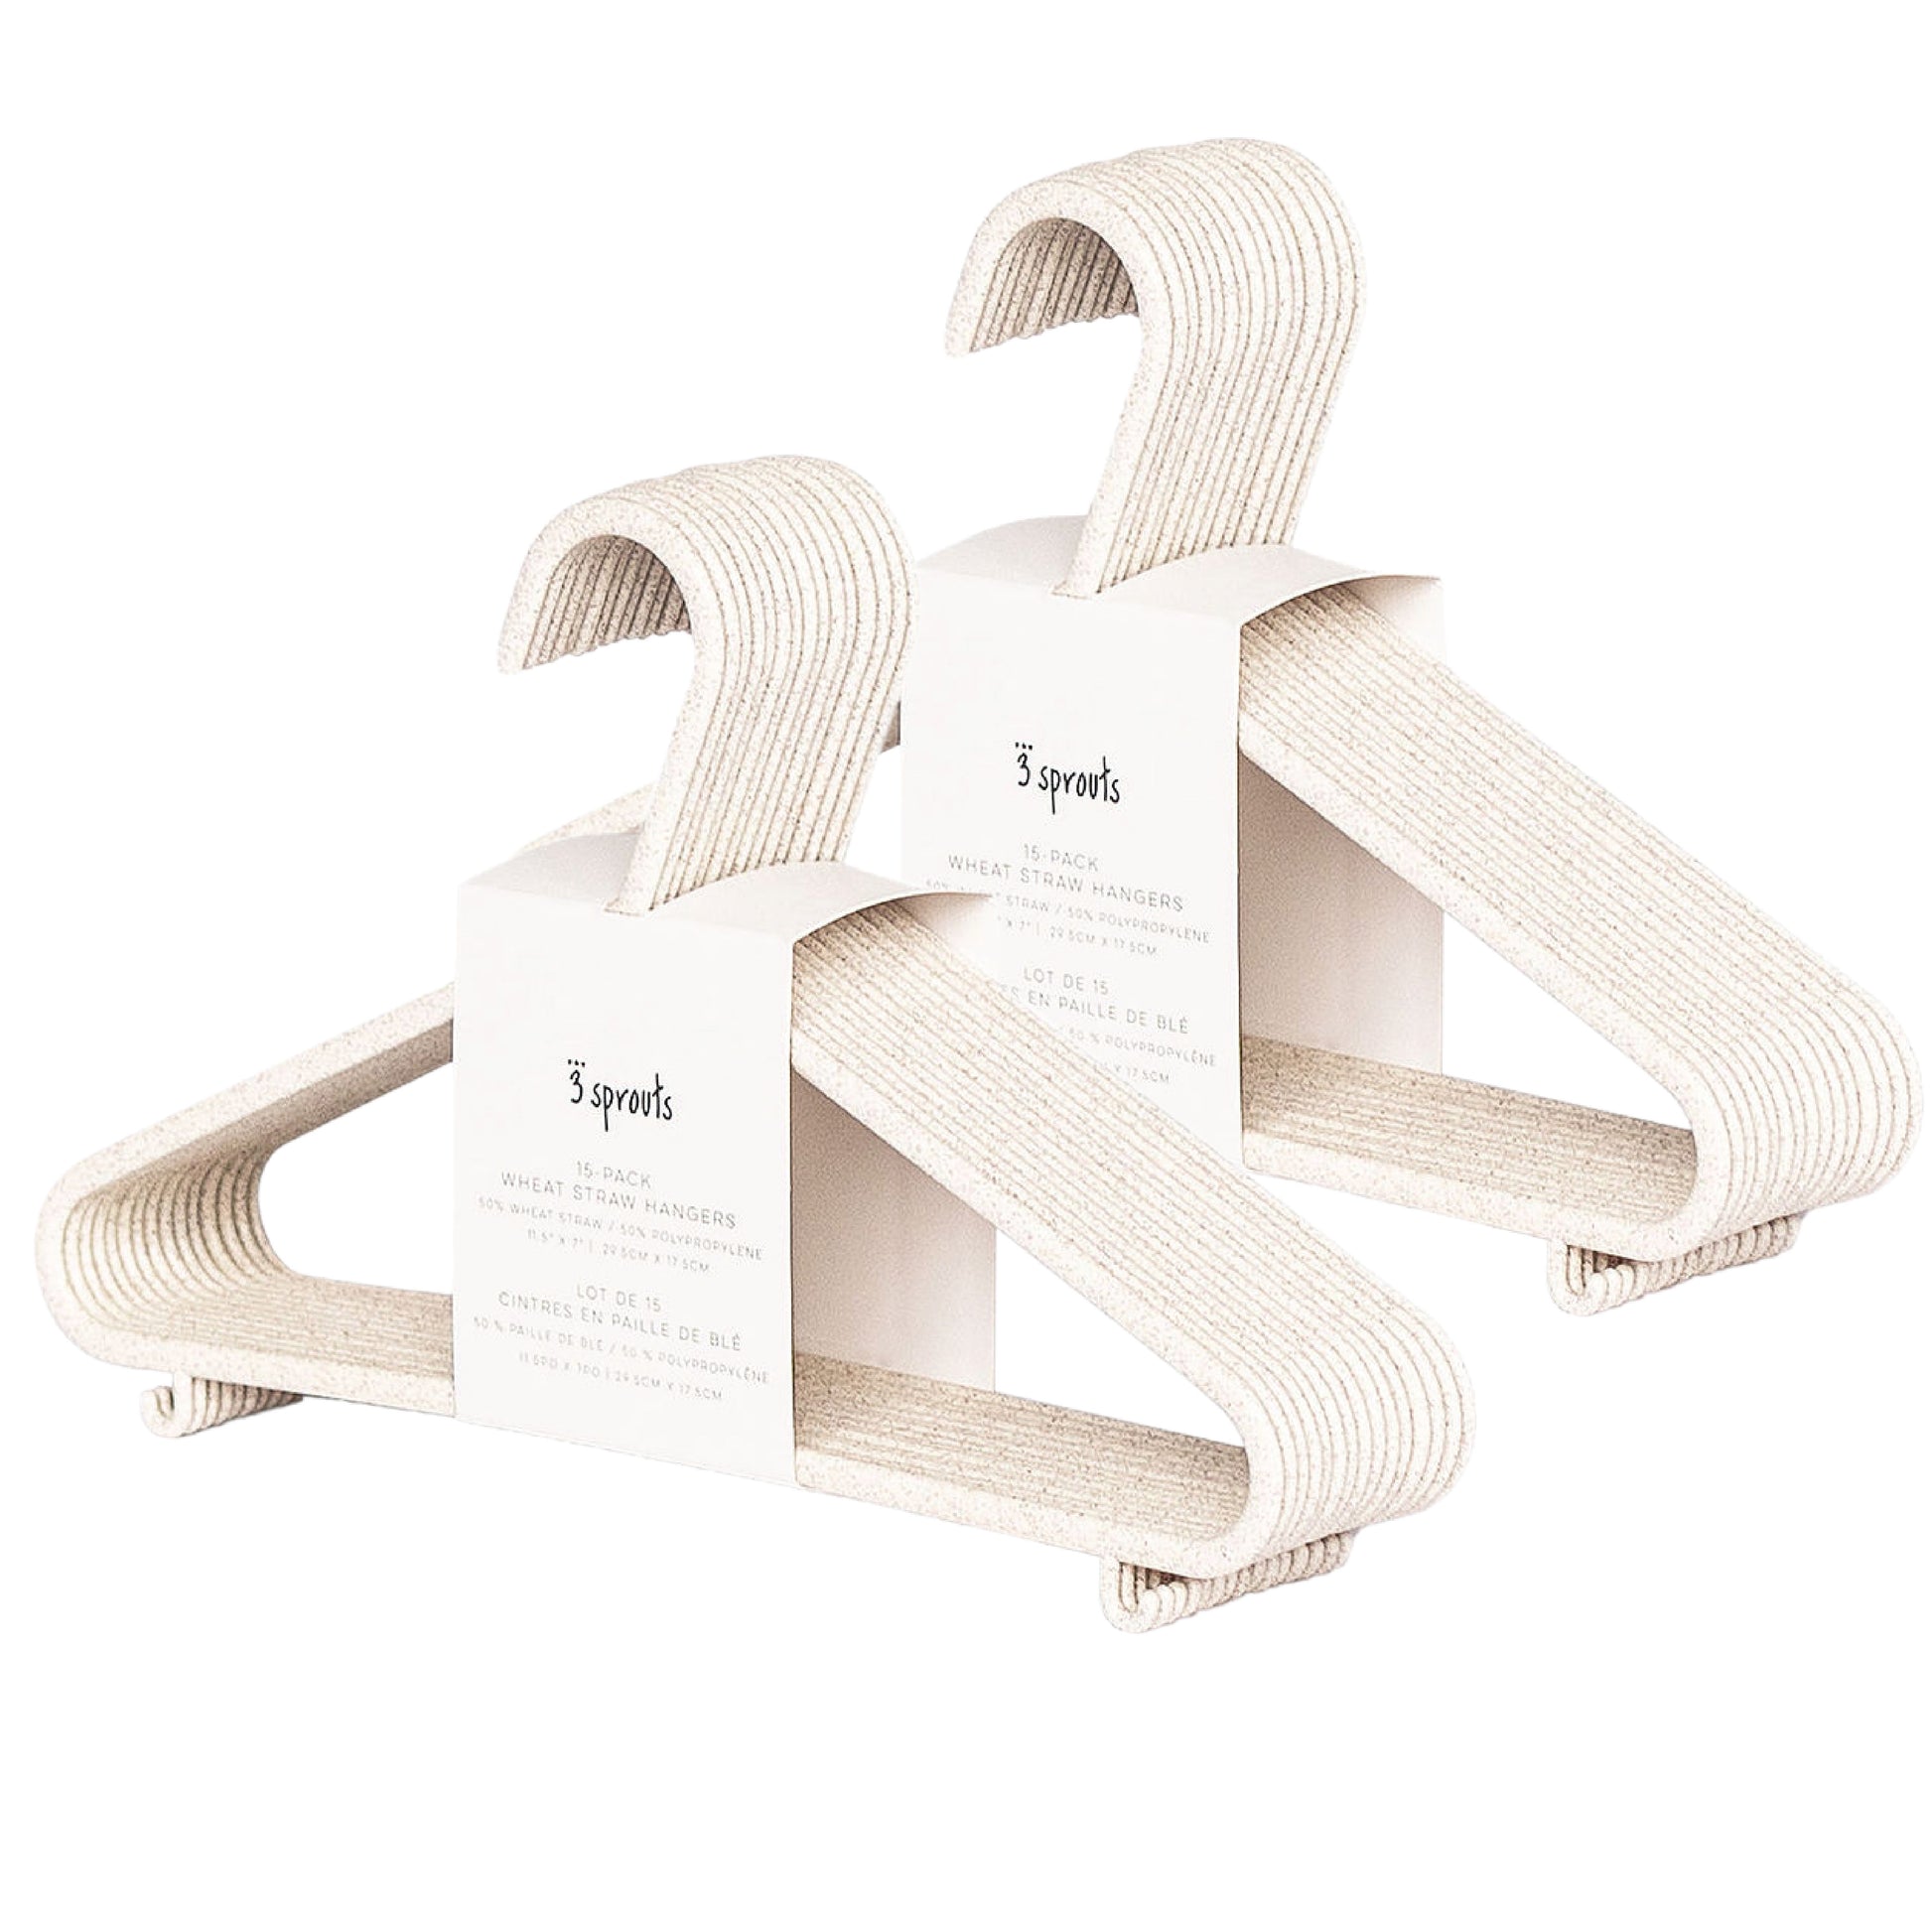 https://www.3sprouts.com/cdn/shop/products/HWCRM-15_3Sprouts_Wheat_Straw_Hangers_Cream_1_large_30pk.jpg?v=1674509942&width=1946